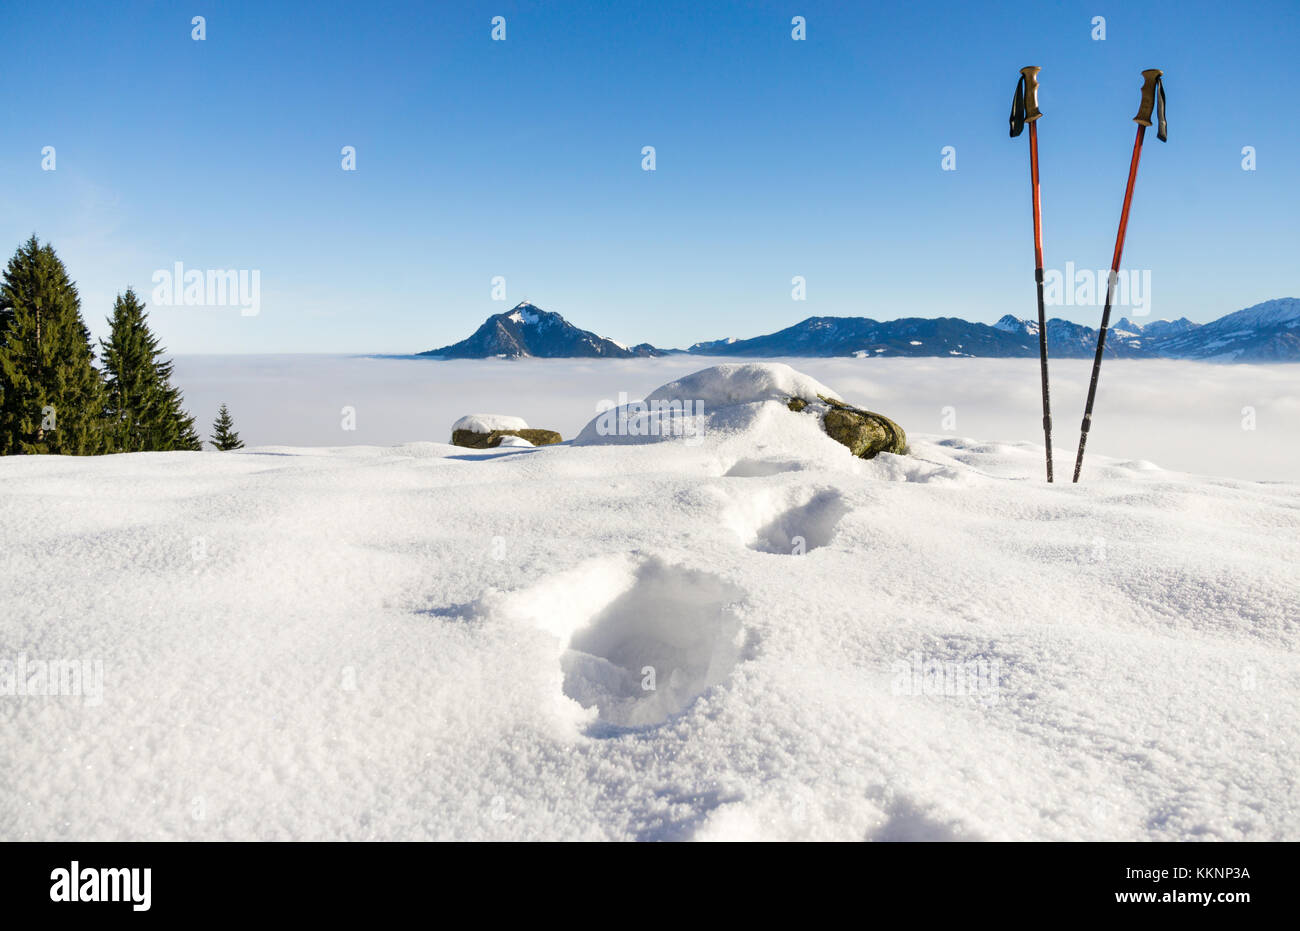 Pair of hiking sticks and footprints in snow. Sporting activity in mountains winter landscape. Allgau, Bavaria, Germany. Stock Photo